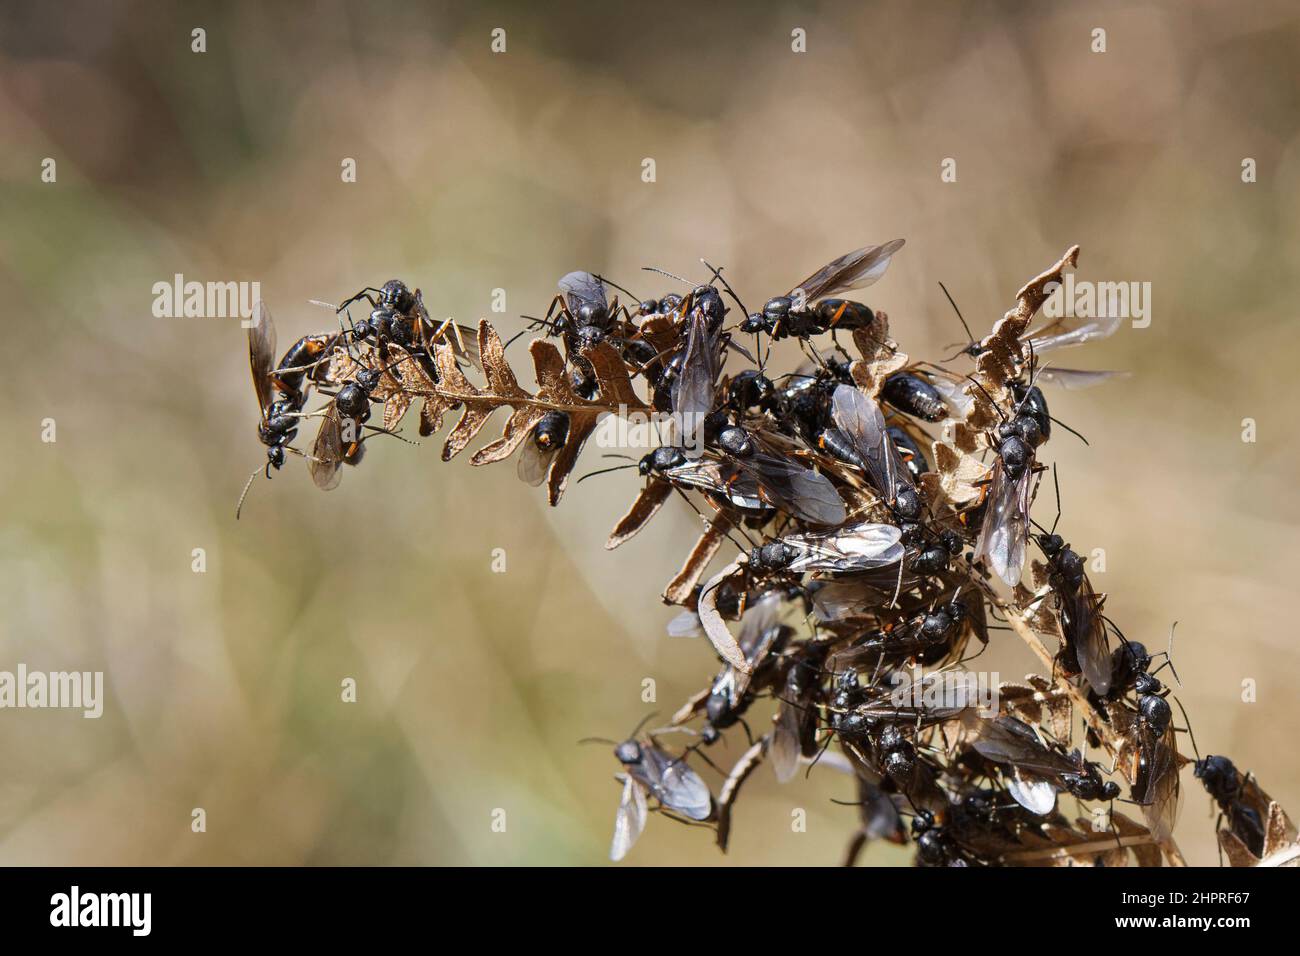 Southern wood ant (Formica rufa) winged male alates climbing a dried bracken leaf to take off from after emerging from a nest, Dorset heathland, UK. Stock Photo